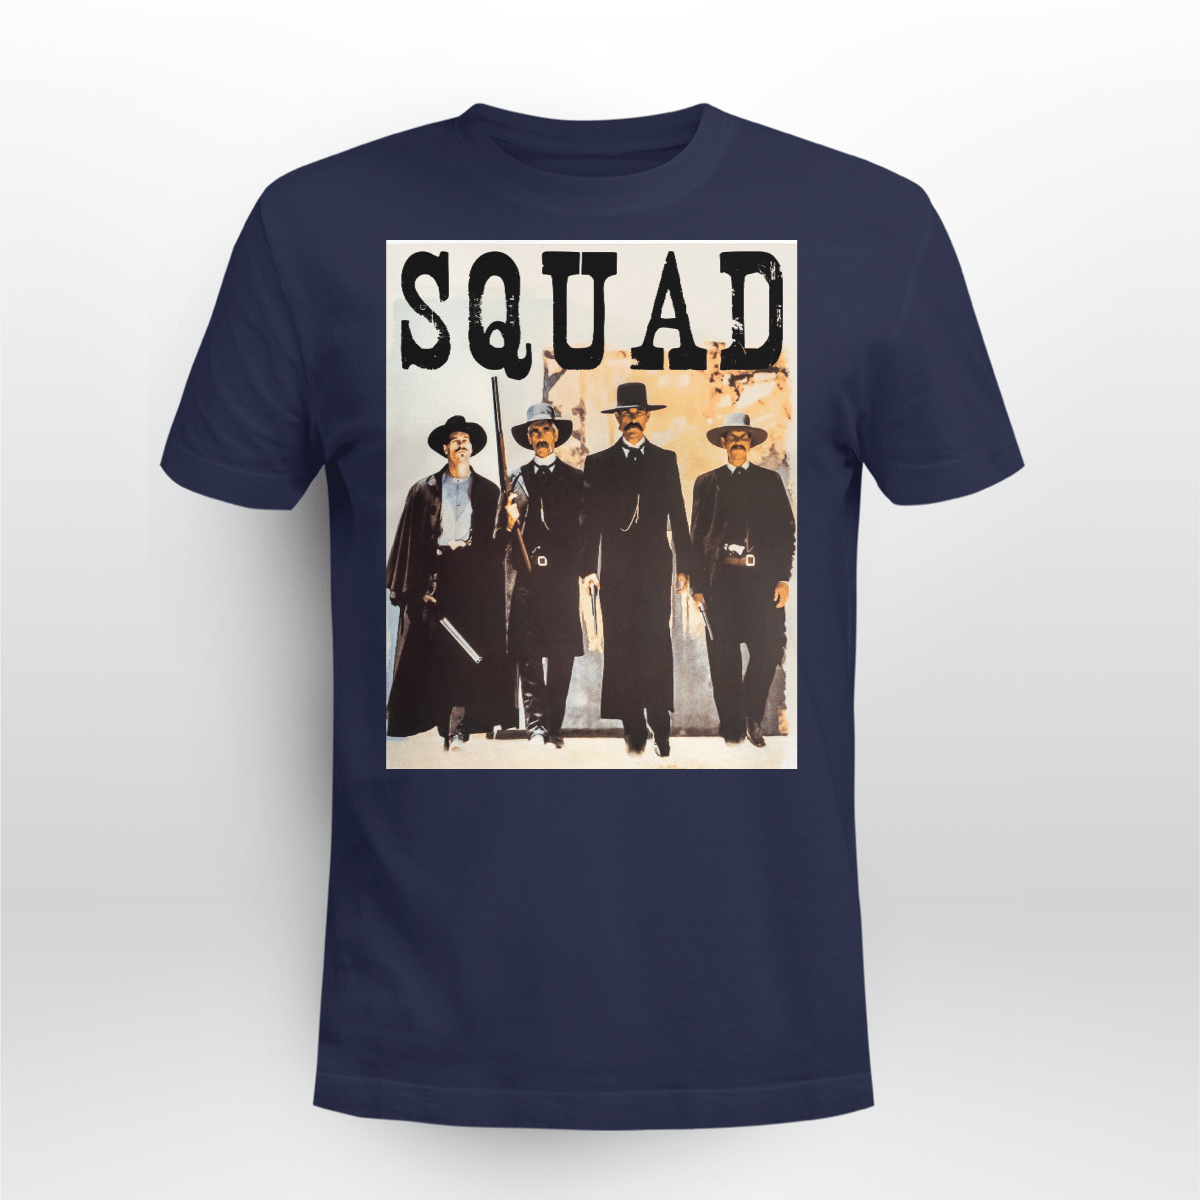 Tombstone Squad Shirt Style: Unisex T-shirt, Color: Navy